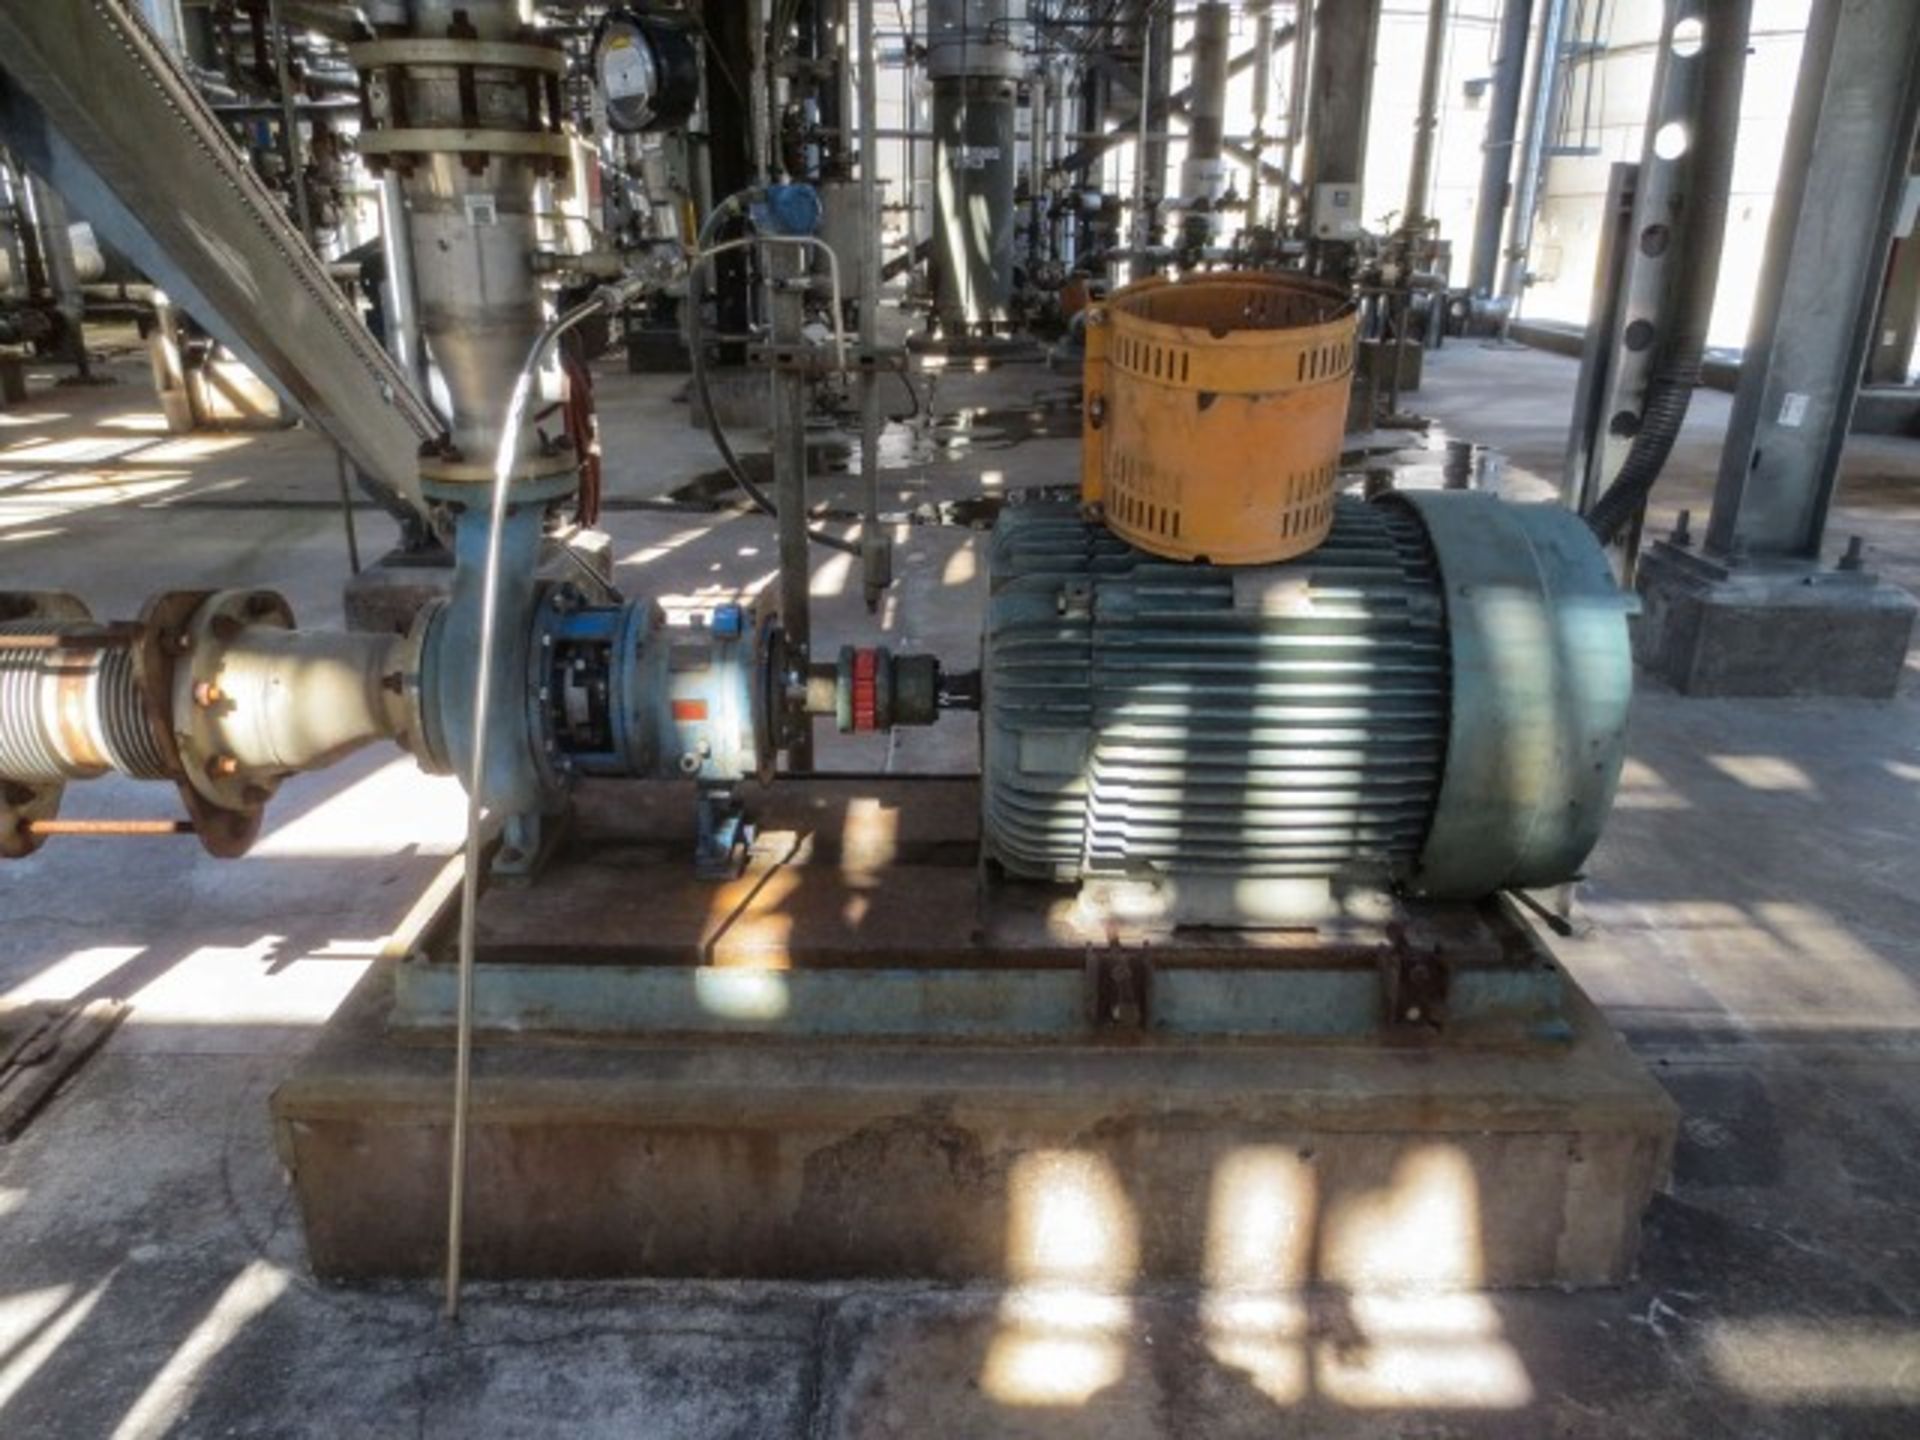 Goulds centrifugal pump, model 3196 LTX. Stainless steel 316. Size 4X6- Rigging/Loading Fee: $850